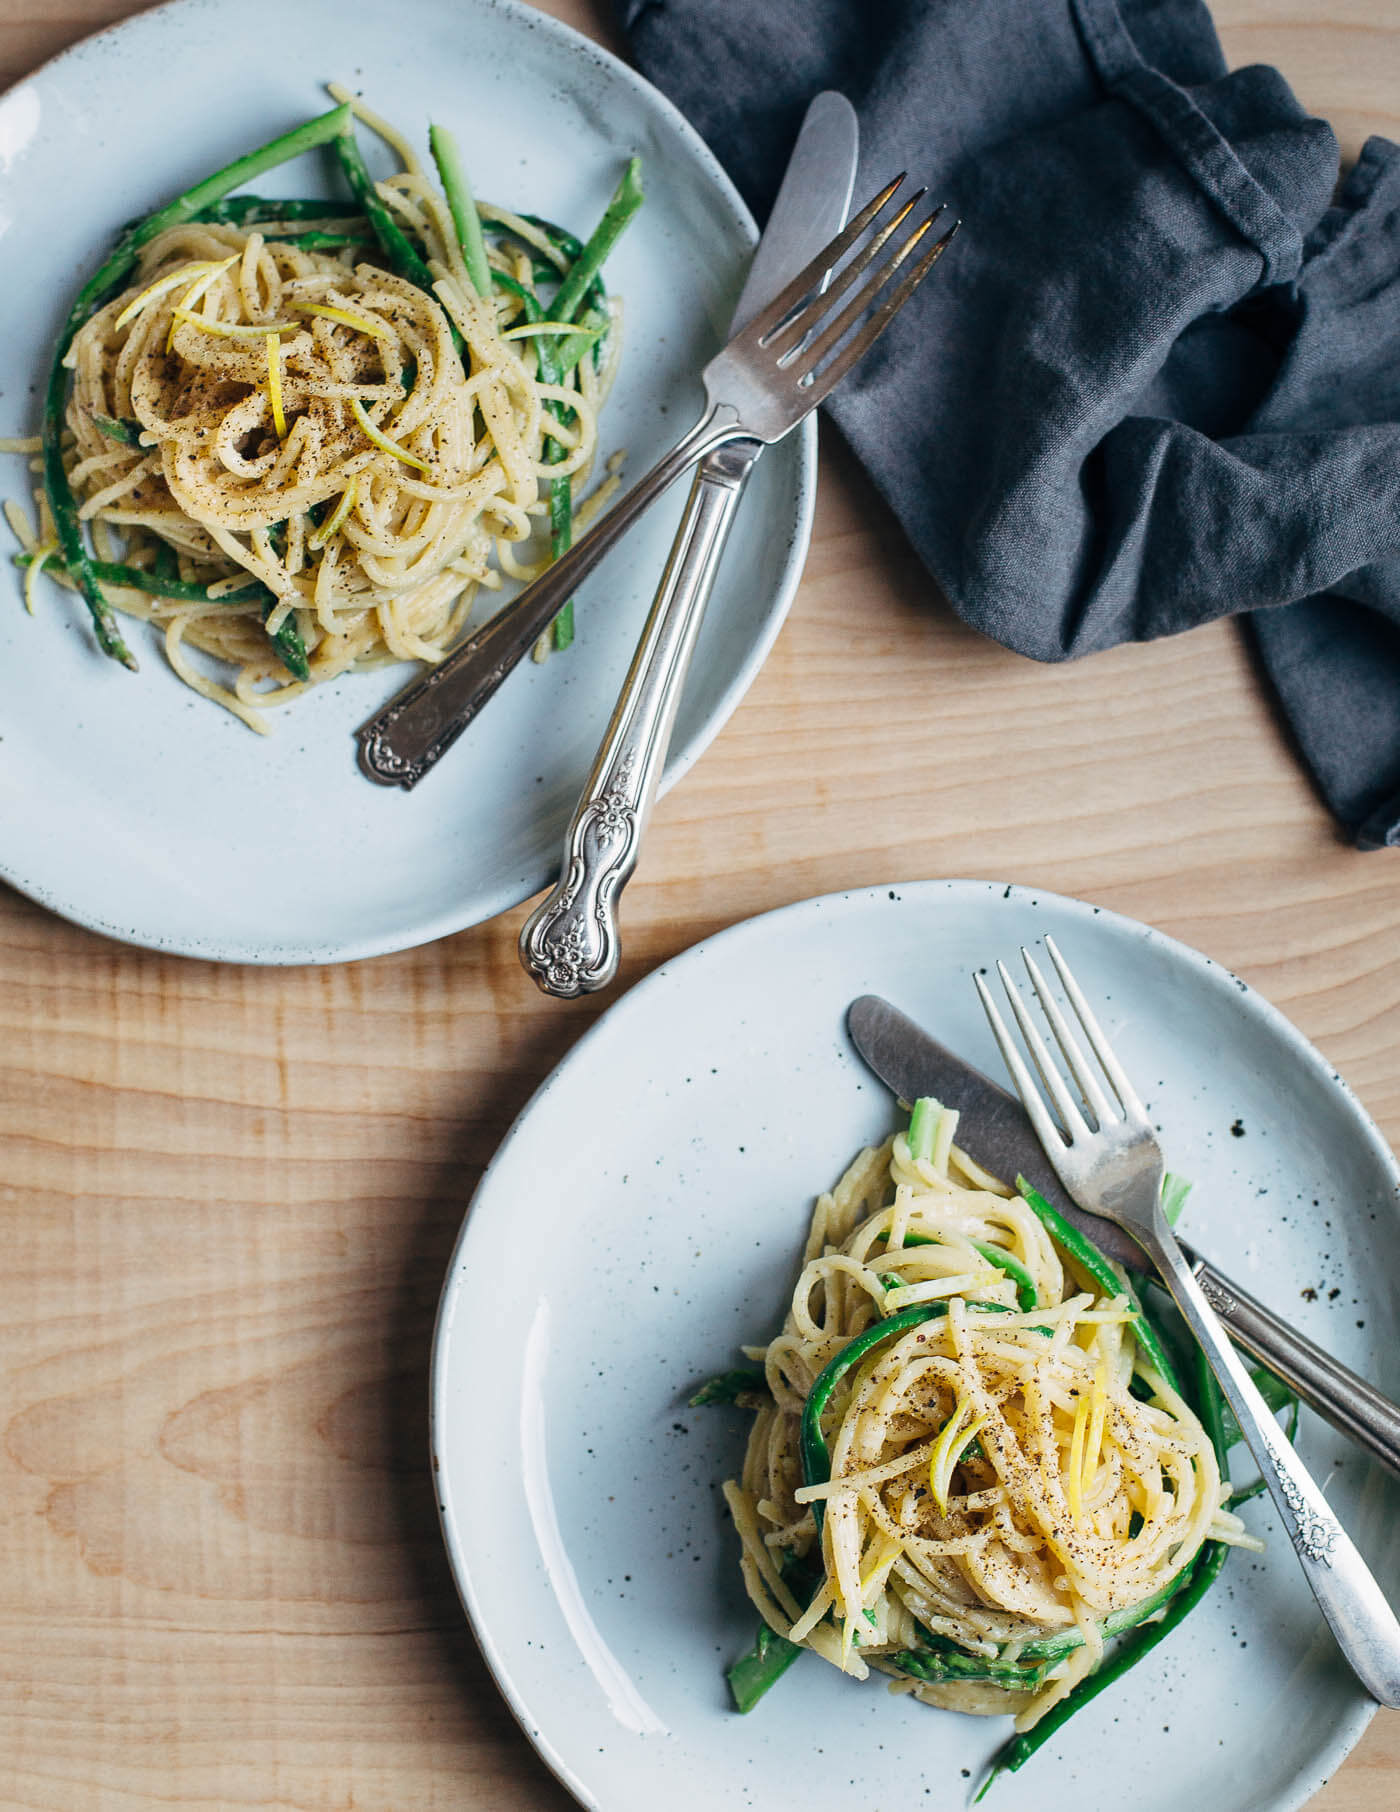 Cacio e pepe with asparagus offers a springtime twist on the classic pasta dish. The dish comes together quickly for weeknight ease and hits all the right notes with peppery, creamy spaghetti and tender spring asparagus.